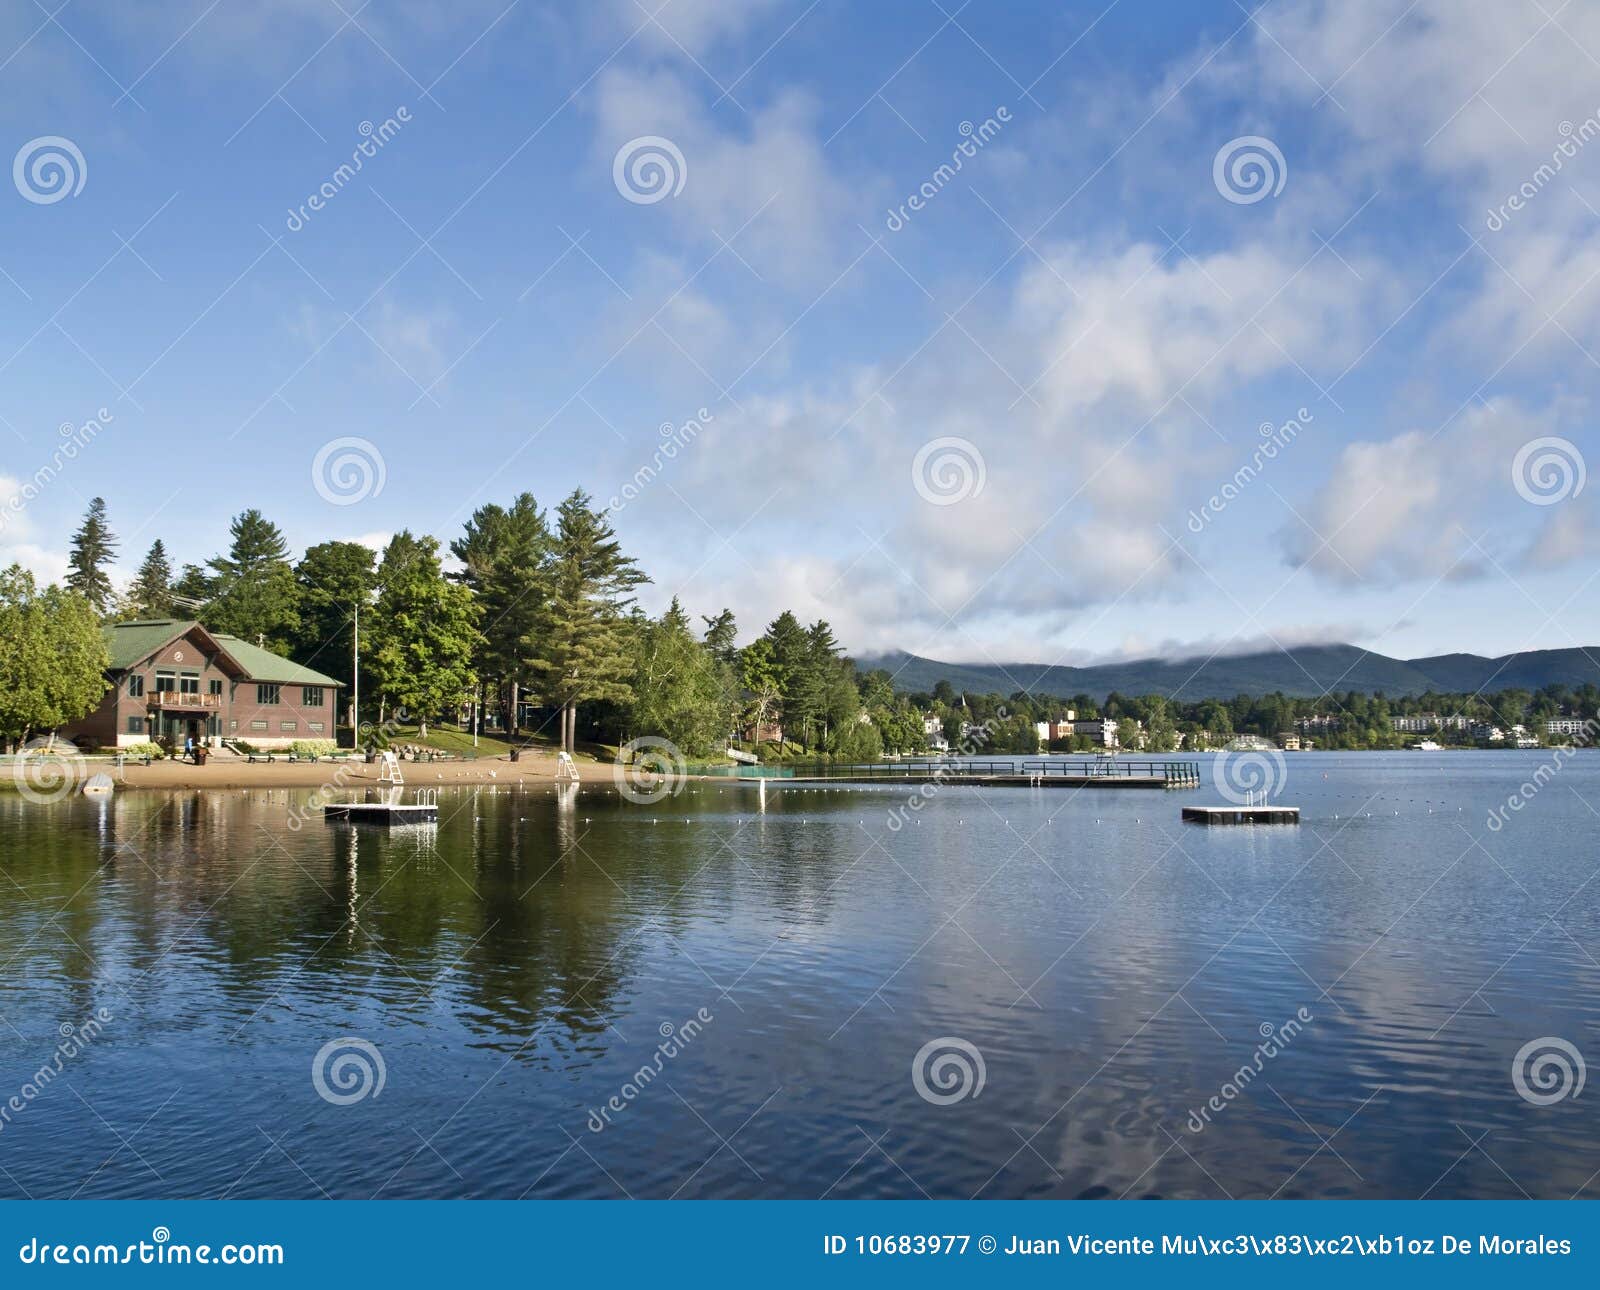 summer in lake placid